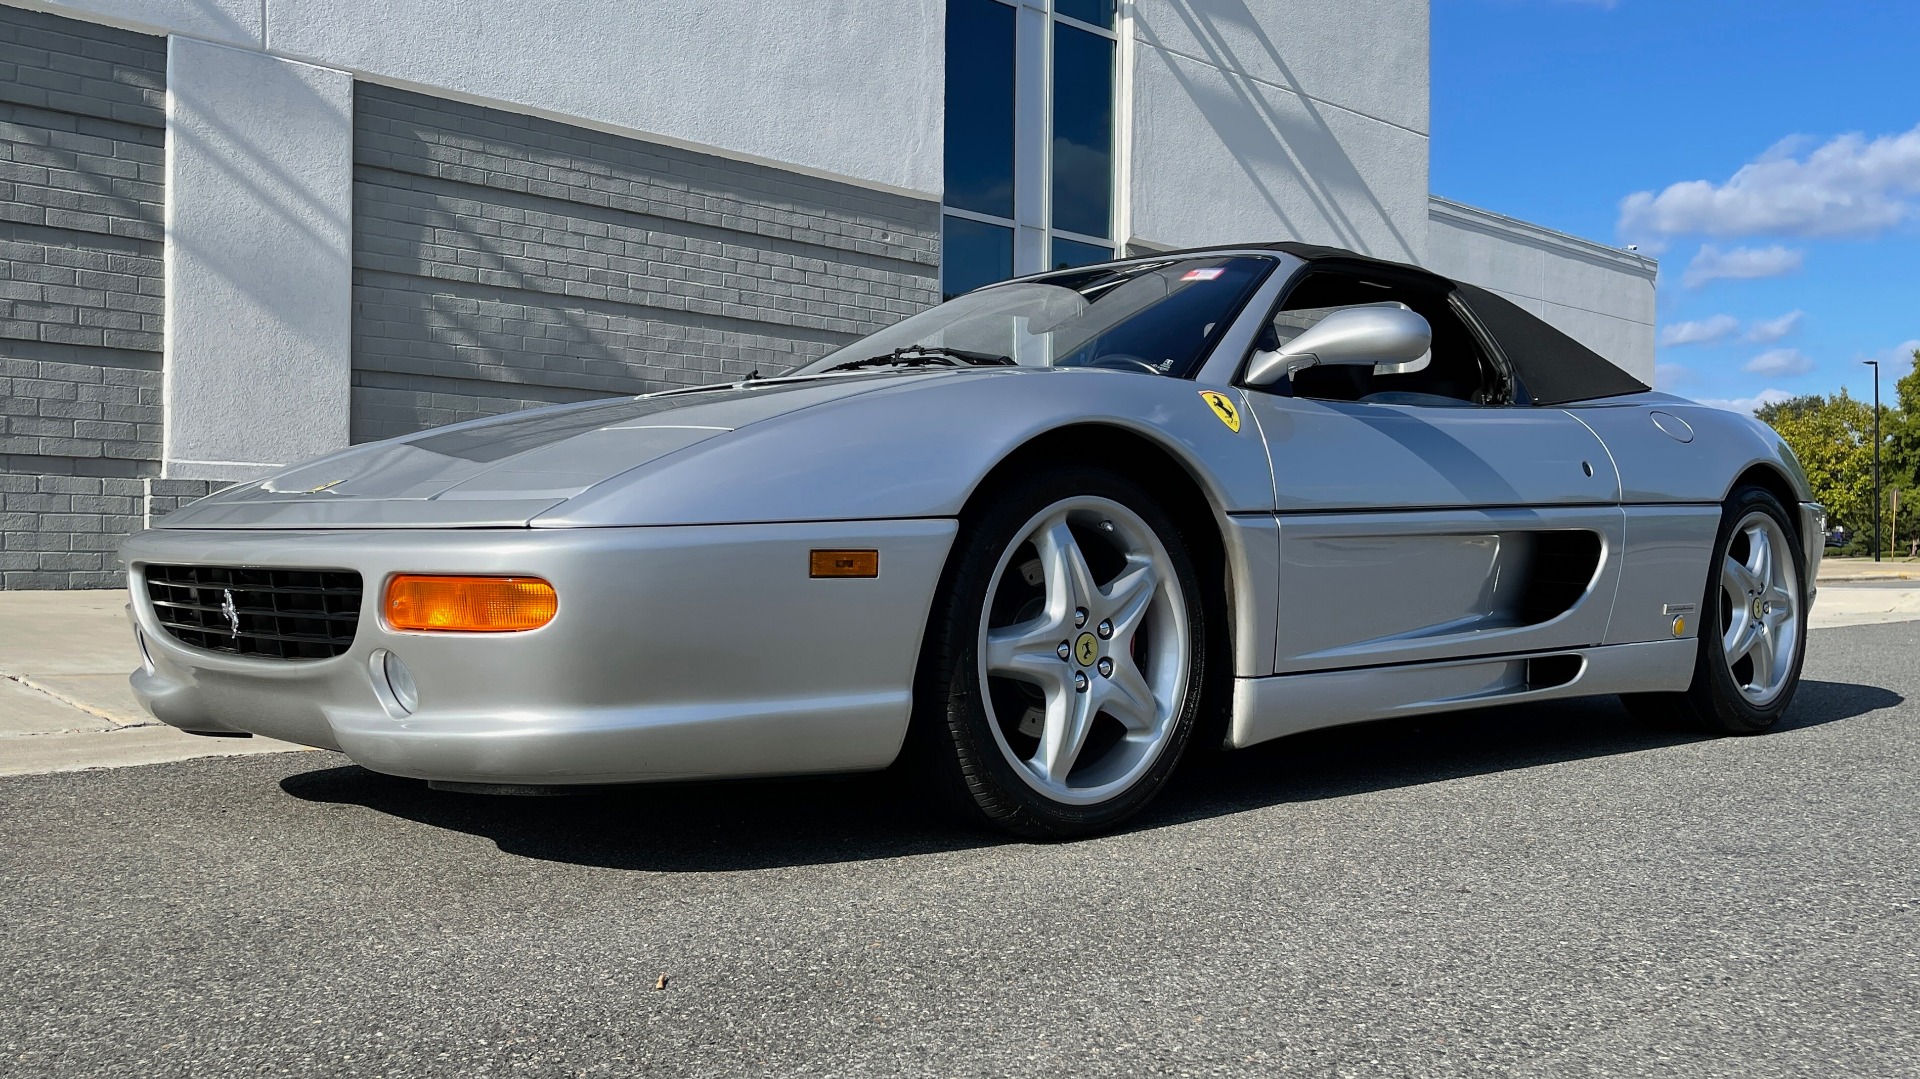 Used 1999 Ferrari F355 SPIDER W/GATED SHIFTER / NO. 31605 / LOW MILES for sale Sold at Formula Imports in Charlotte NC 28227 8